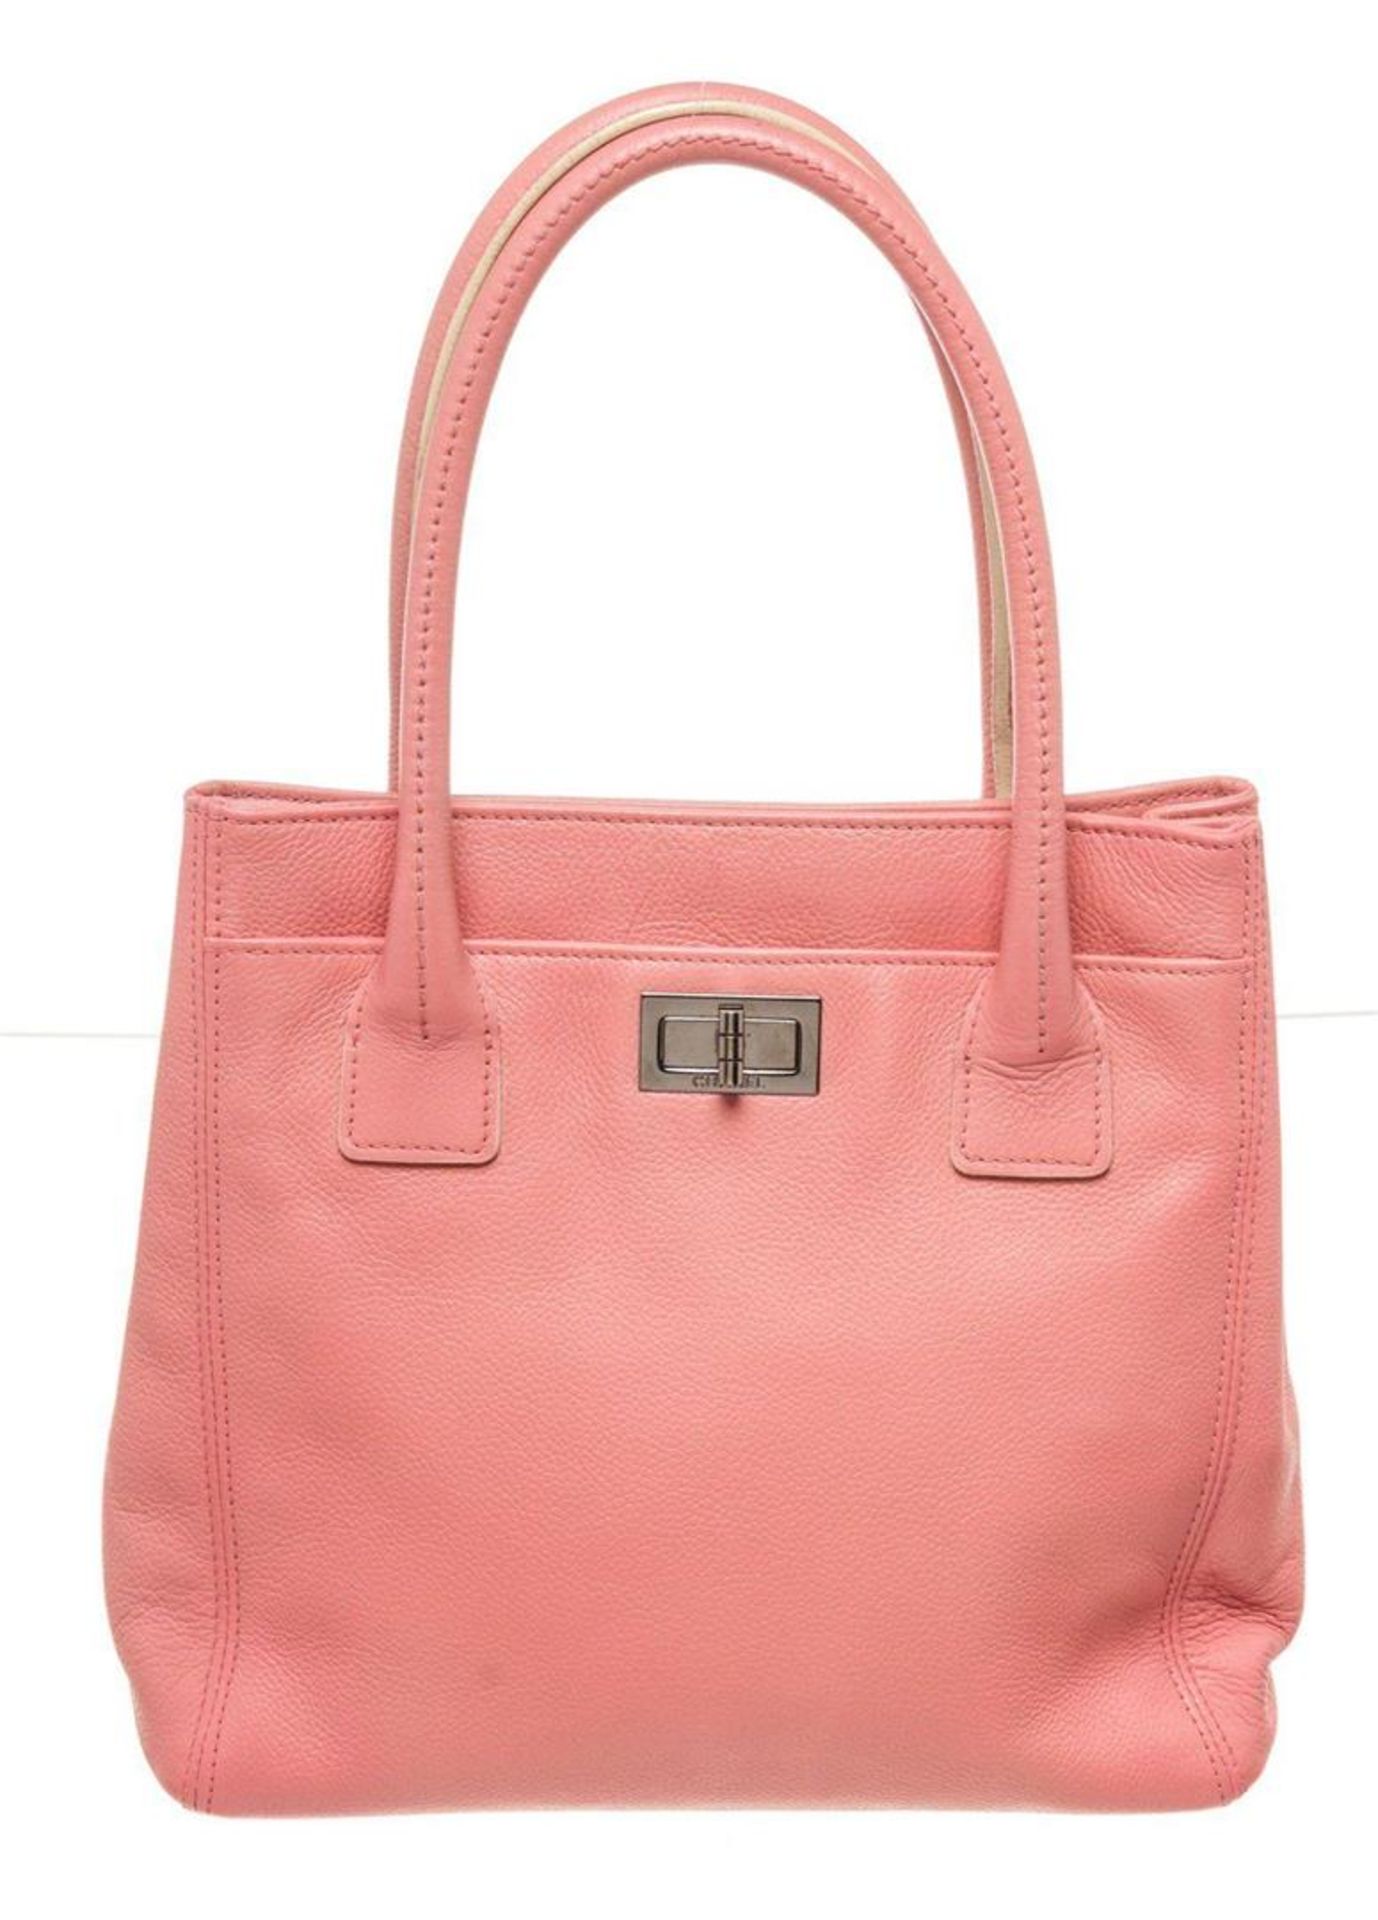 Chanel Pink Leather Small Shopper Bag